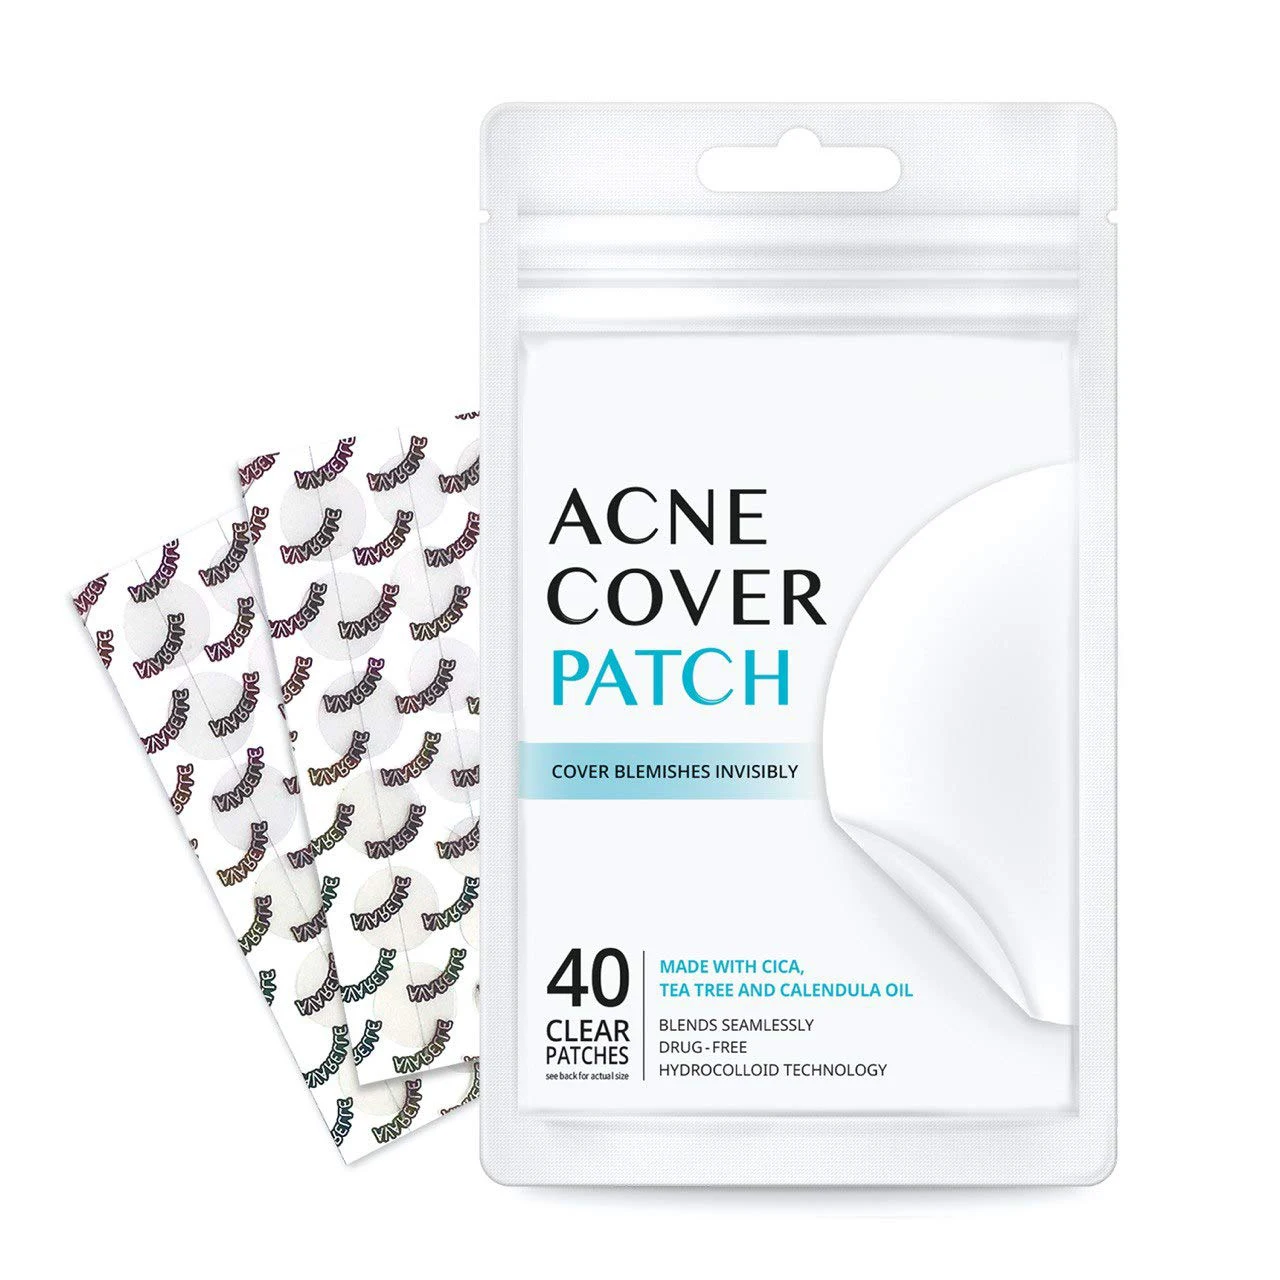 

Acne Pimple Patch 36 Absorbing Hydrocolloid Spot Treatment Tea Tree Oil Calendula Oil and Cica Certified Vegan acne cover patch